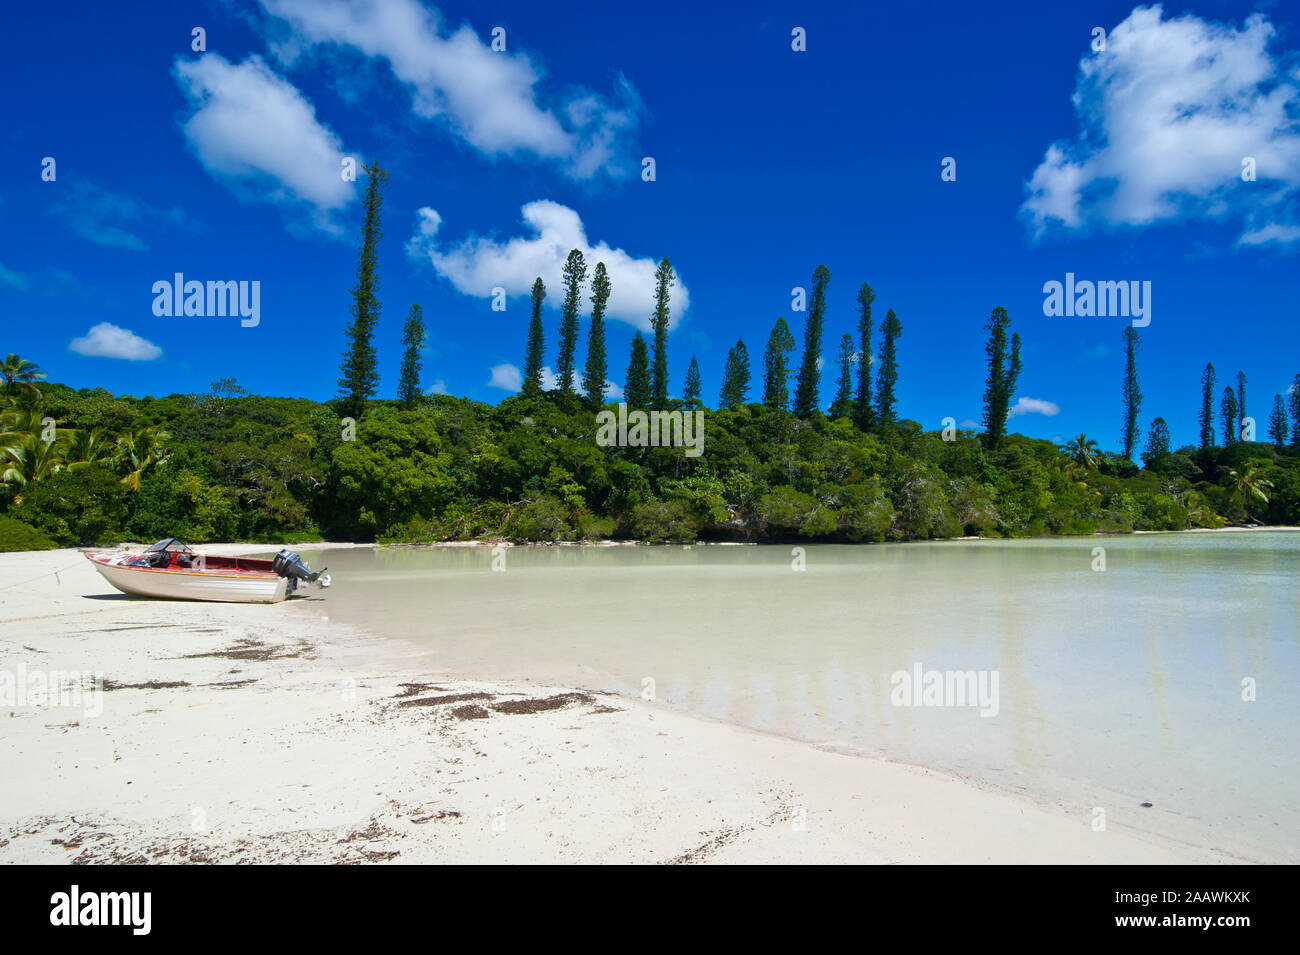 Boat moored at beach by trees against blue sky, Melanesia, New Caledonia Stock Photo